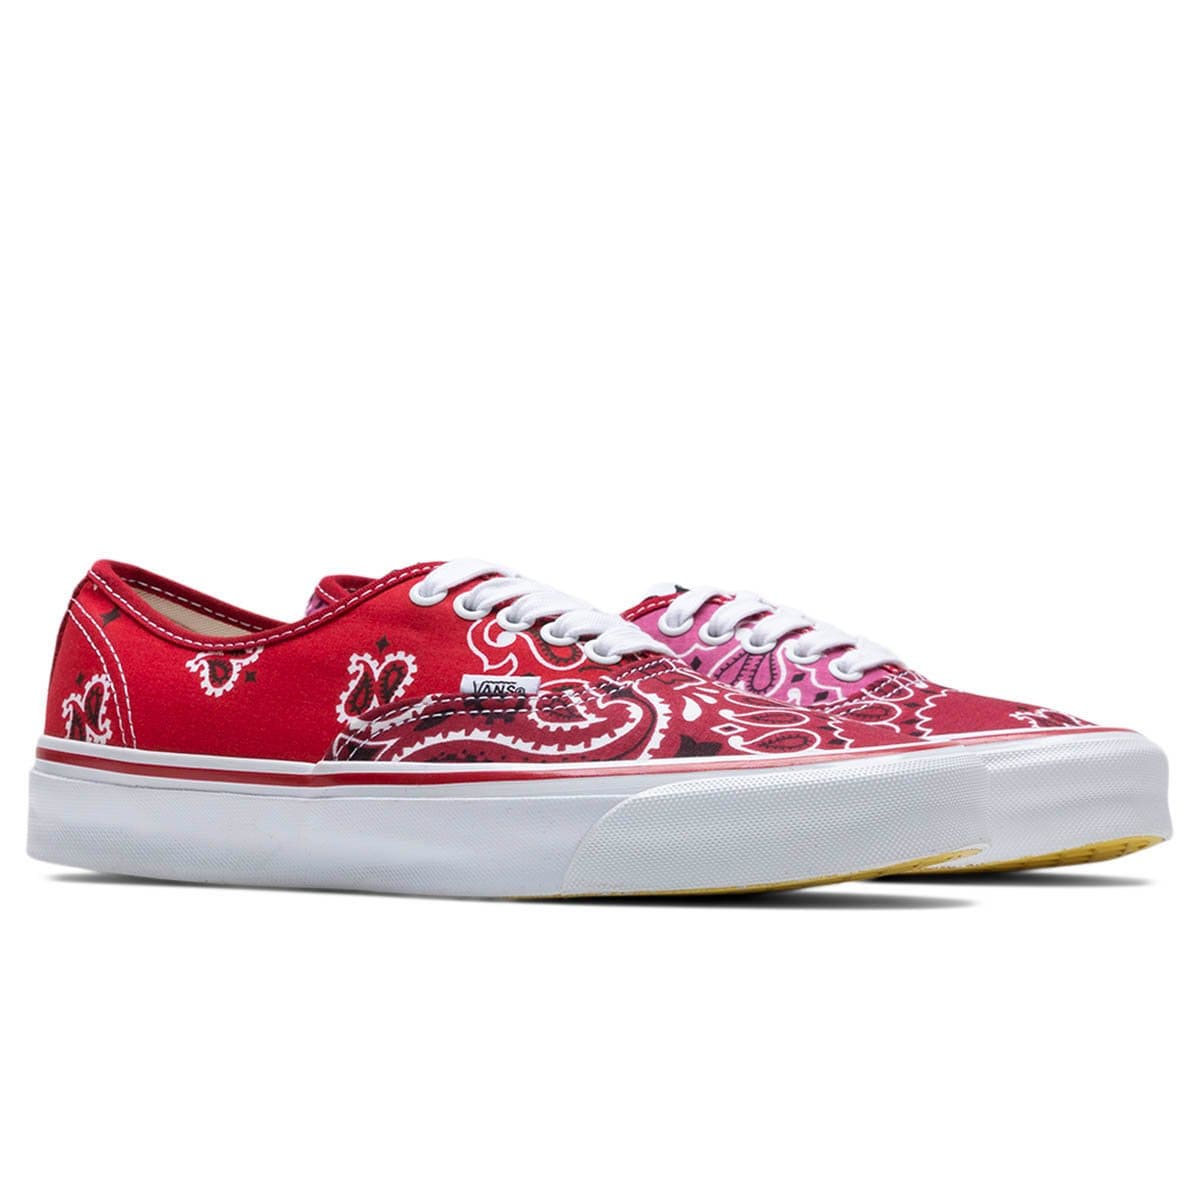 Vault by Vans Casual x Bedwin & the Heartbreakers OG AUTHENTIC LX